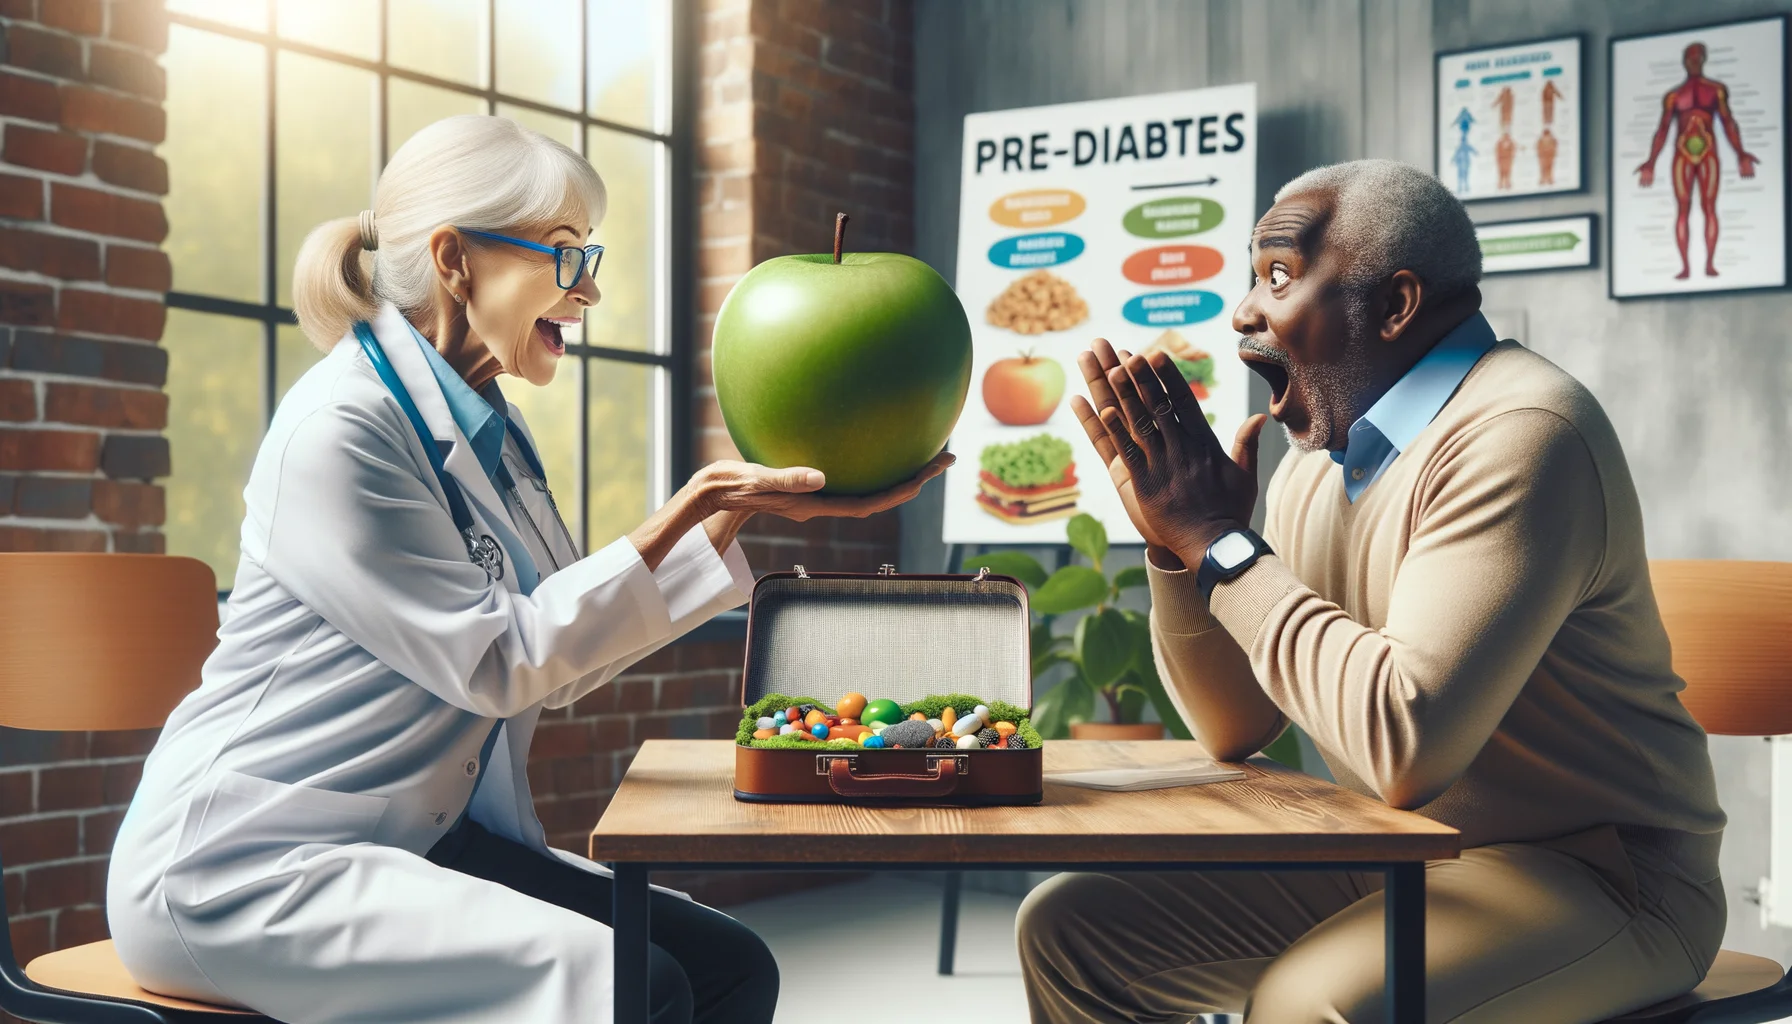 Whimsical and cheeky image of a perfectly set-up scenario where an elderly Caucasian female with a lab coat, symbolizing a nutritionist, is seen holding up a large, glossy green apple and passionately explaining to a skeptical middle-aged Black male. The apple is labeled 'Candy for Pre-Diabetes '. They're in a cozy consultation room filled with natural light, creating a soft ambiance. On the background wall, there's a colorful chart showing healthy food options. The man on the other hand opens a lunchbox that's shockingly filled with actual candies, showcasing his previous misconceptions about managing pre-diabetes.